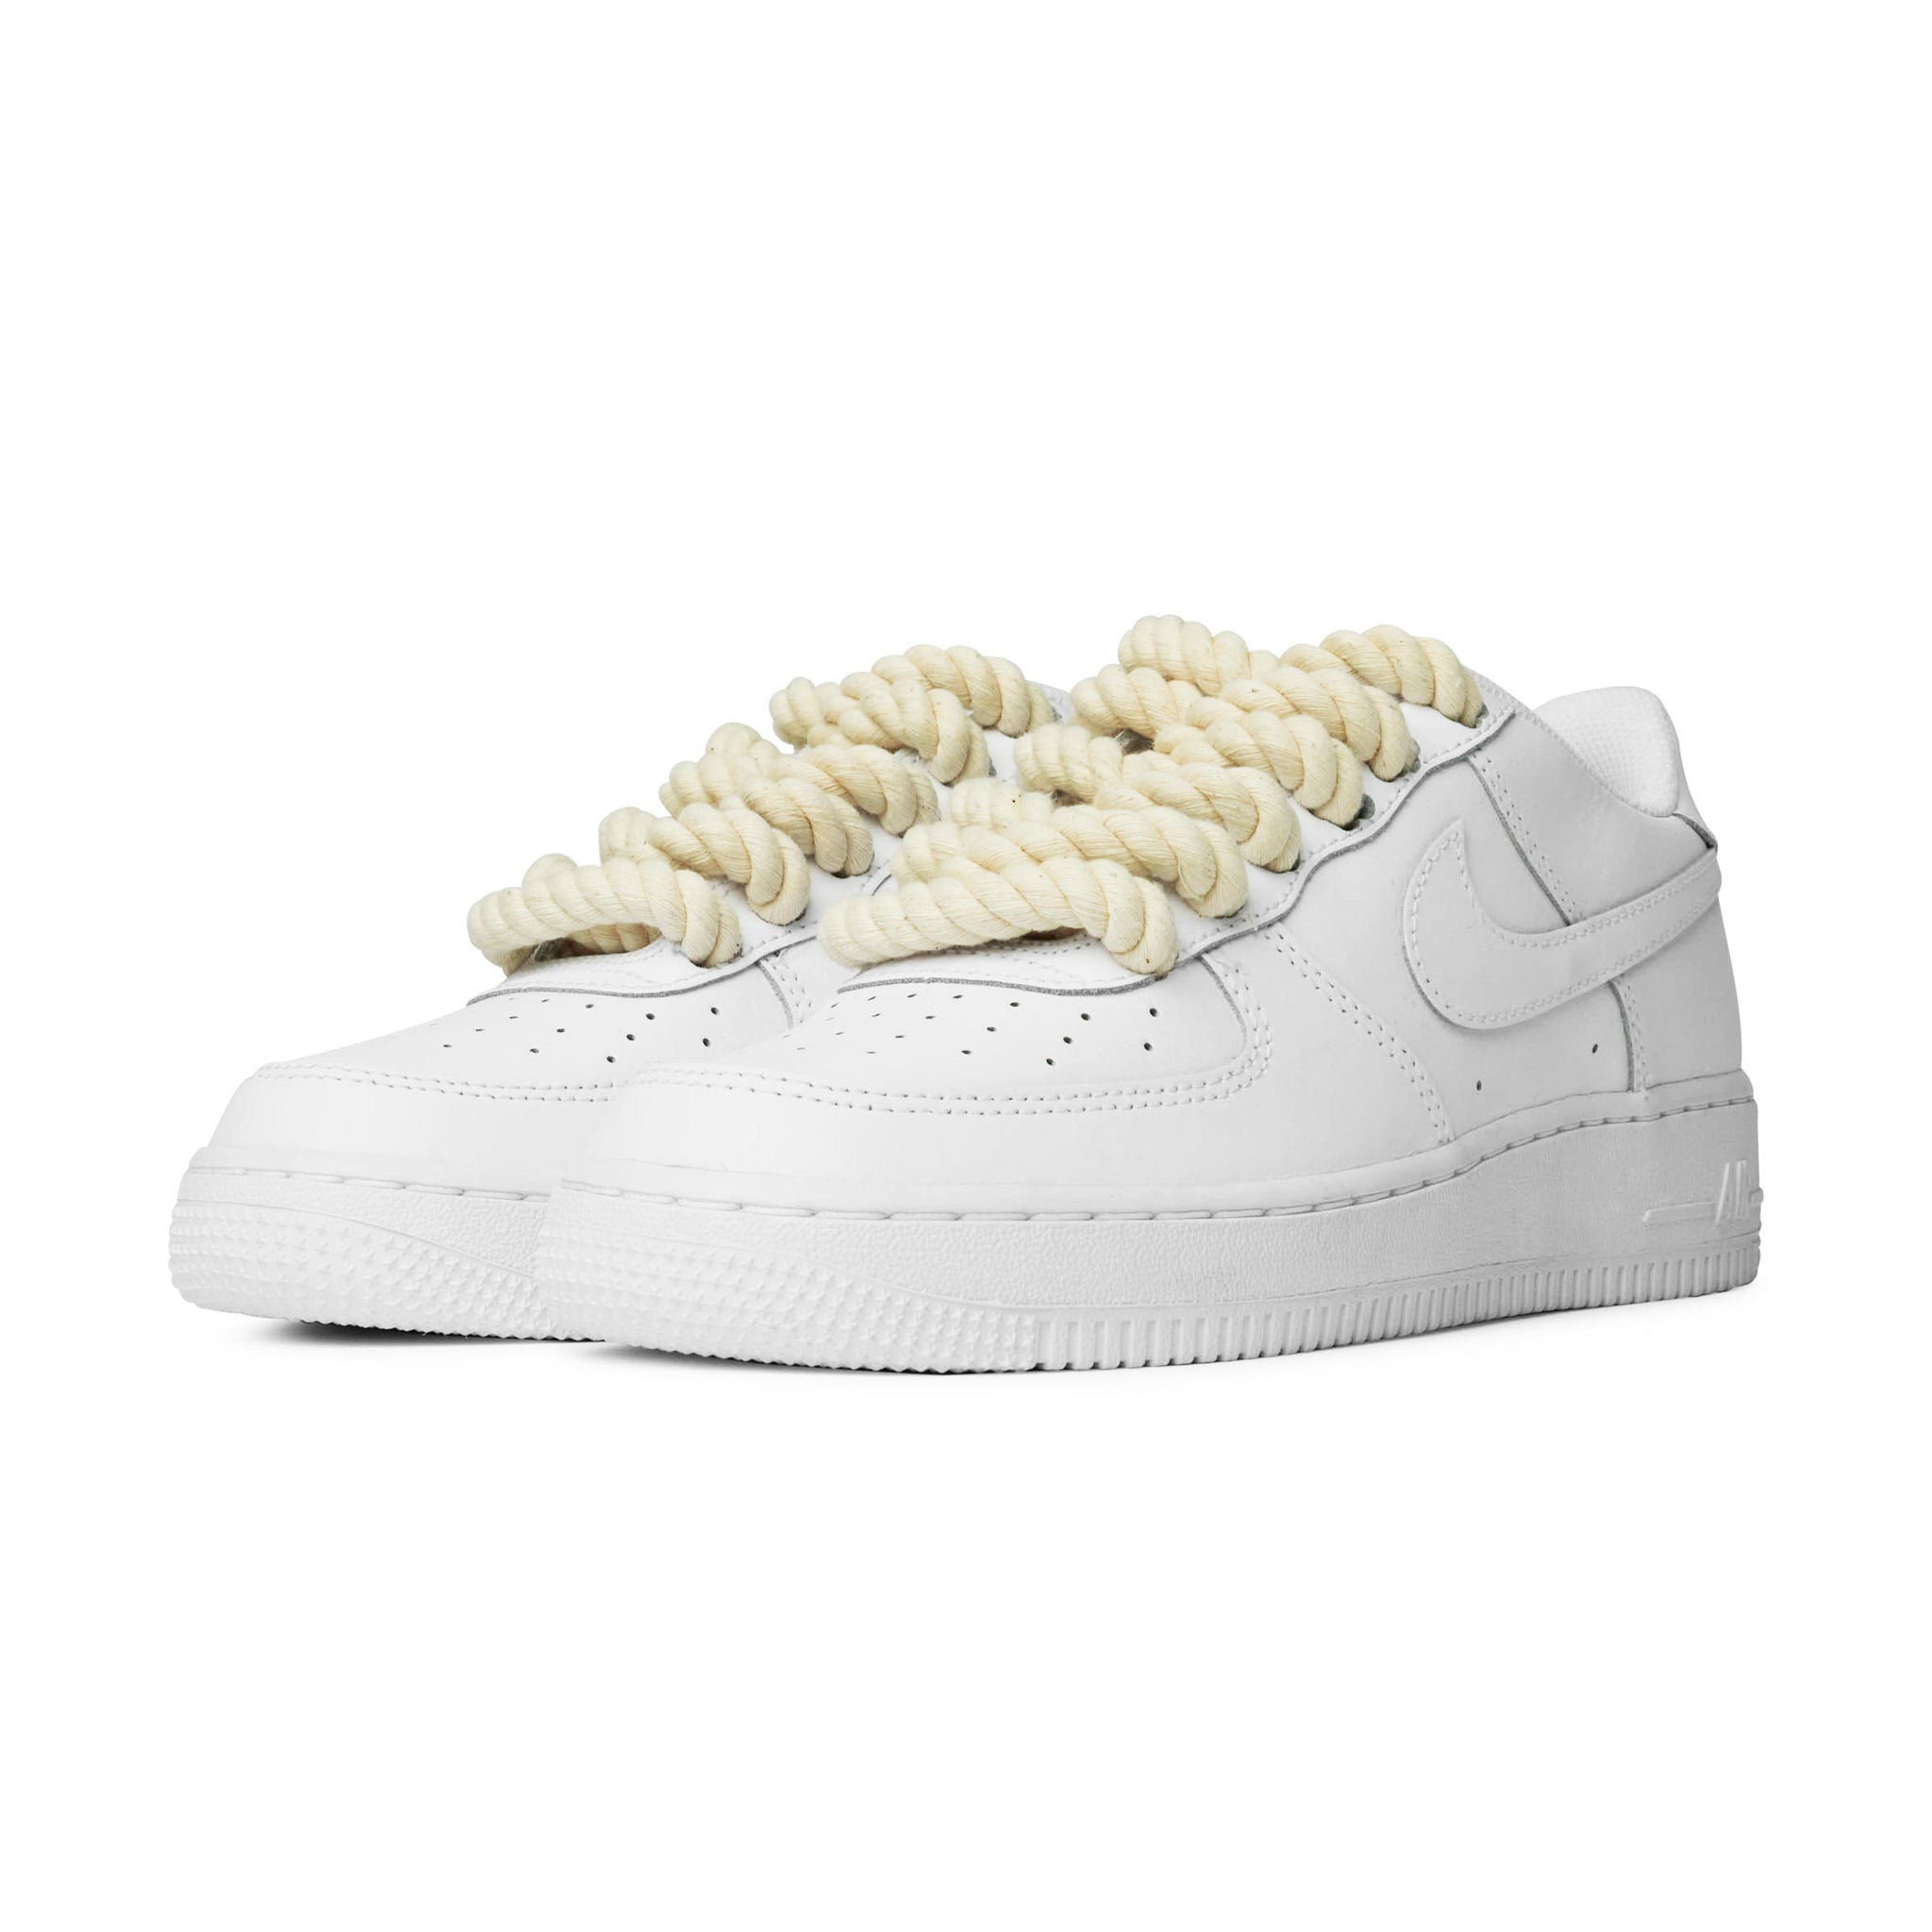 Front side view of Nike Air Force 1 Low Rope Lace White Cream (GS) 314192-117